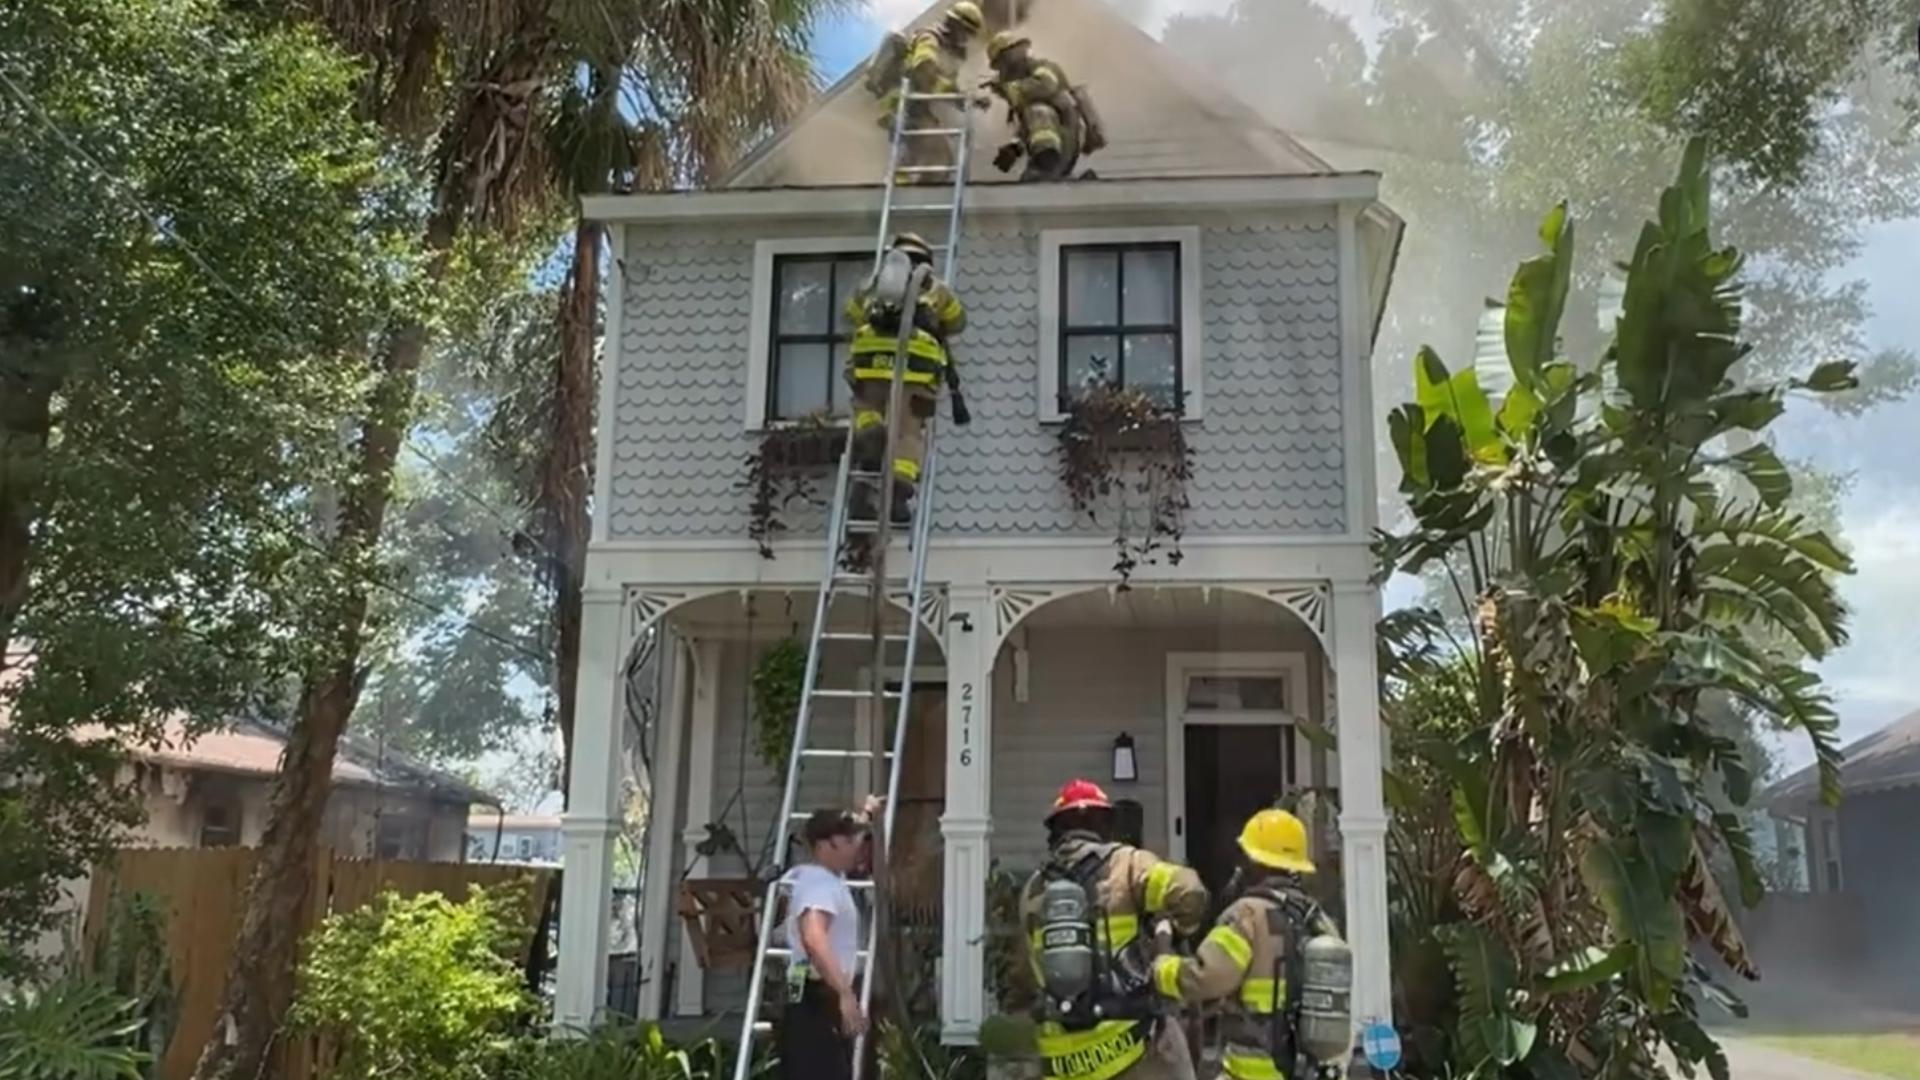 Two homes on North Morgan Street went up in flames after a shed behind one of them caught on fire, according to Tampa Fire Rescue.